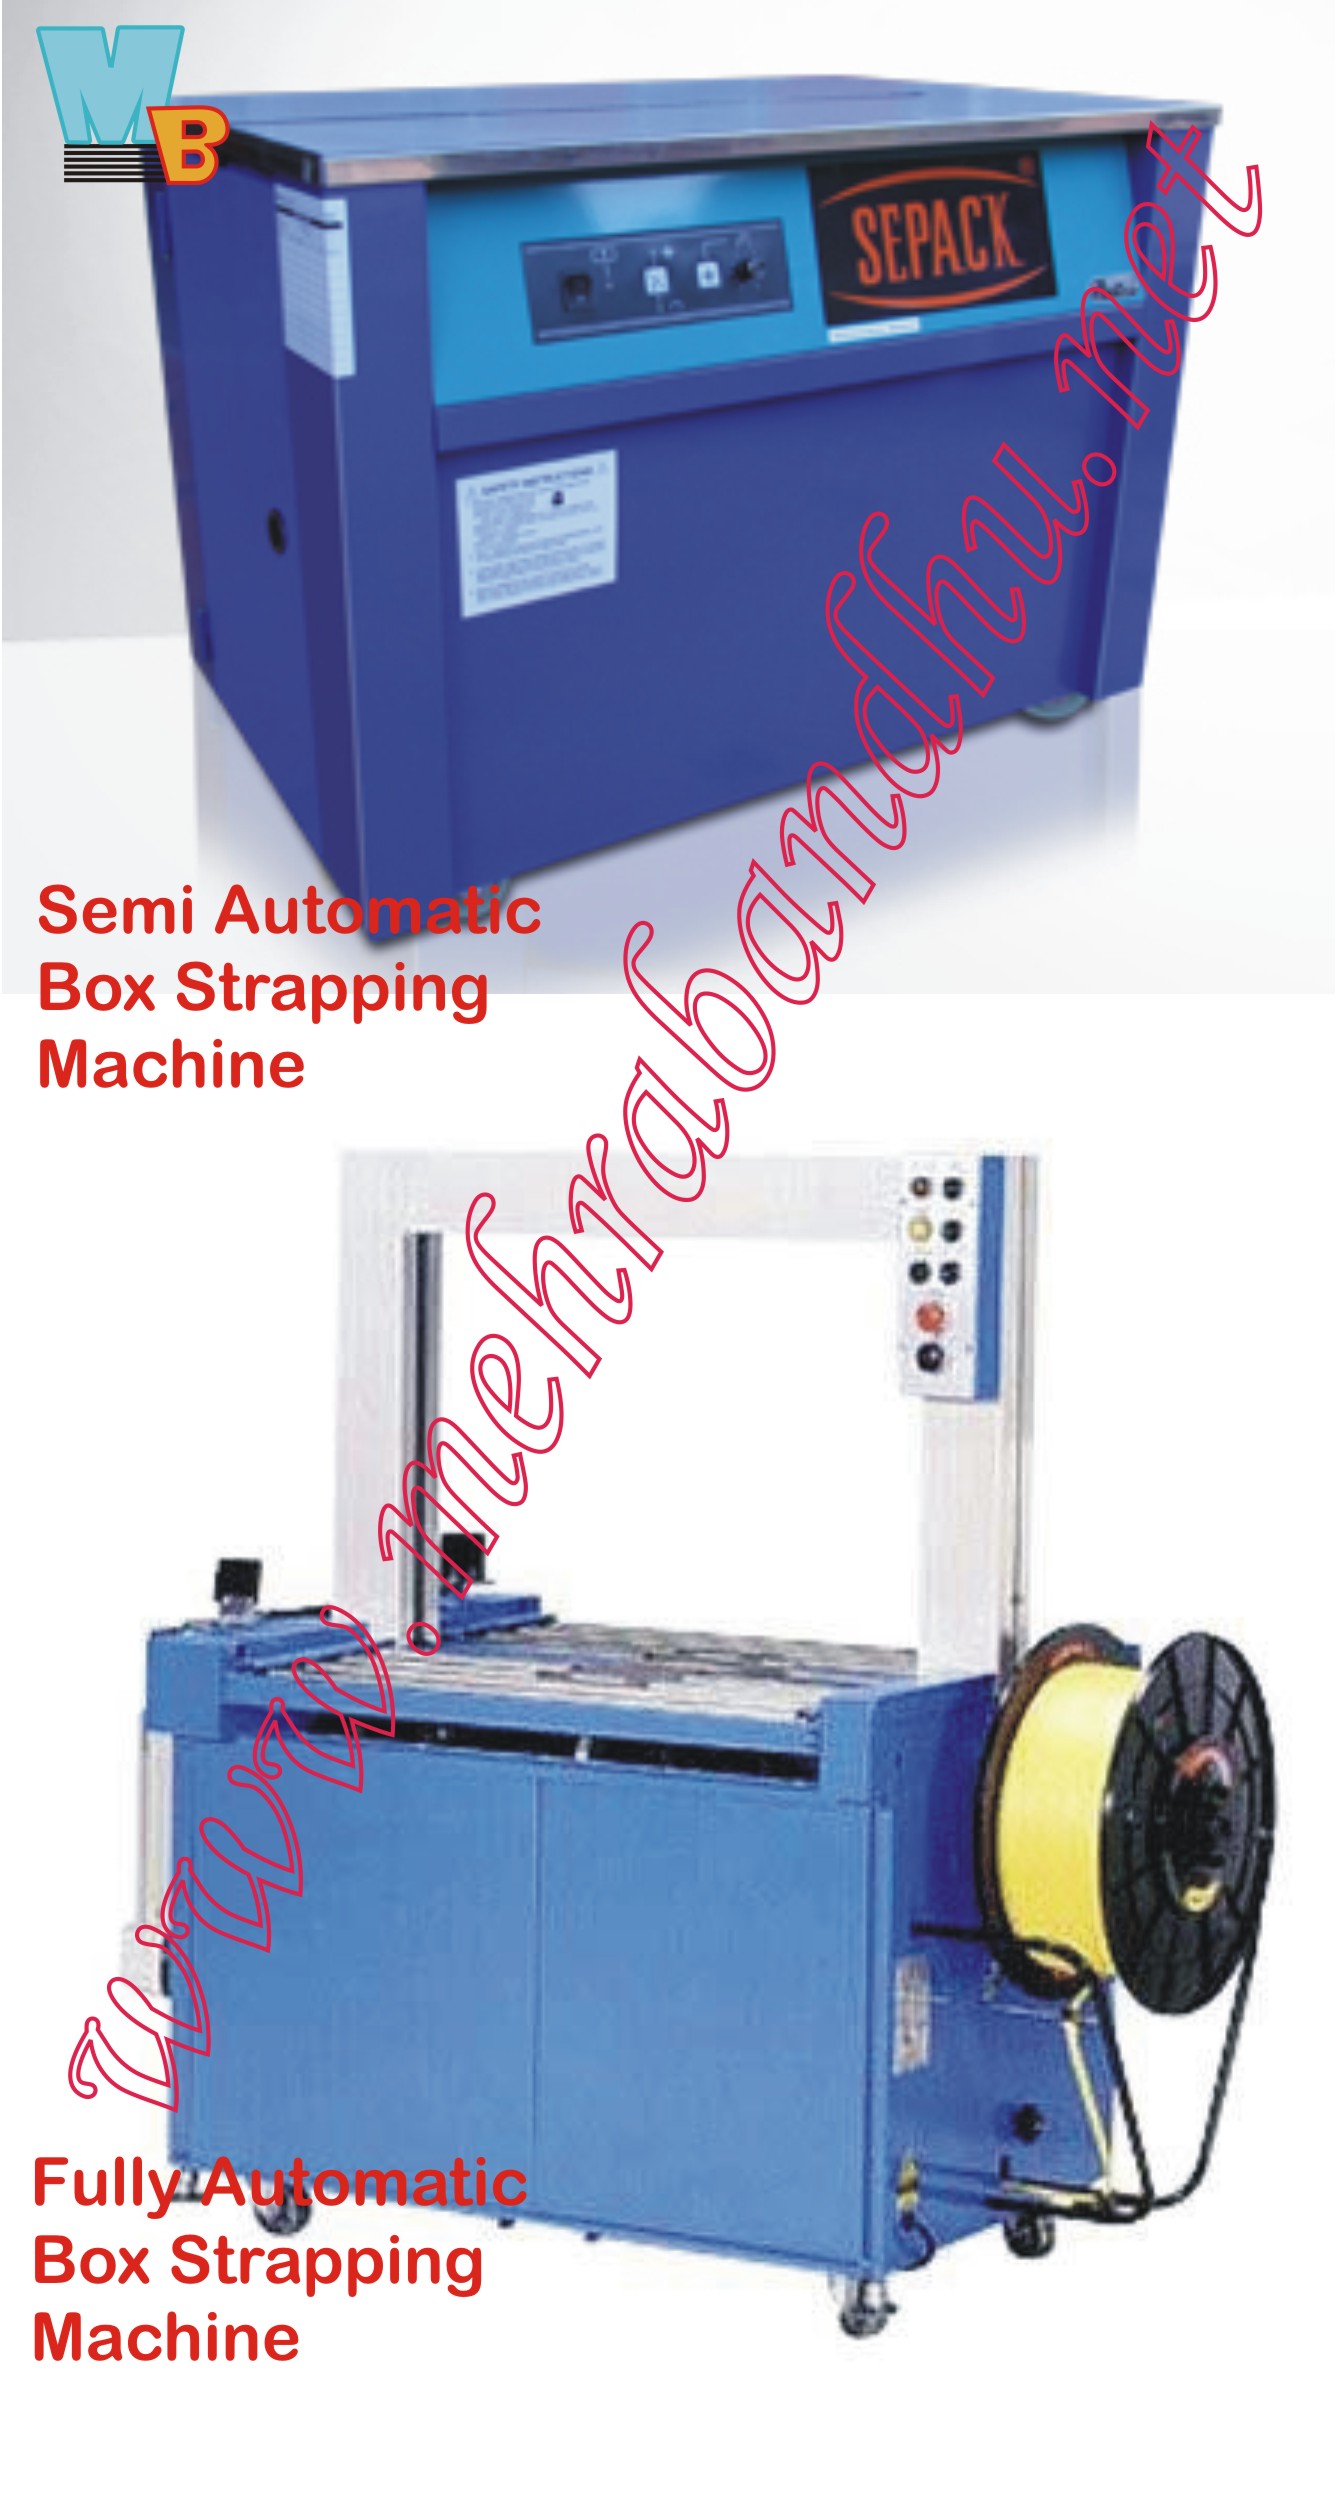 Manufacturers Exporters and Wholesale Suppliers of Semi Automatic Strapping machines Varanasi Uttar Pradesh